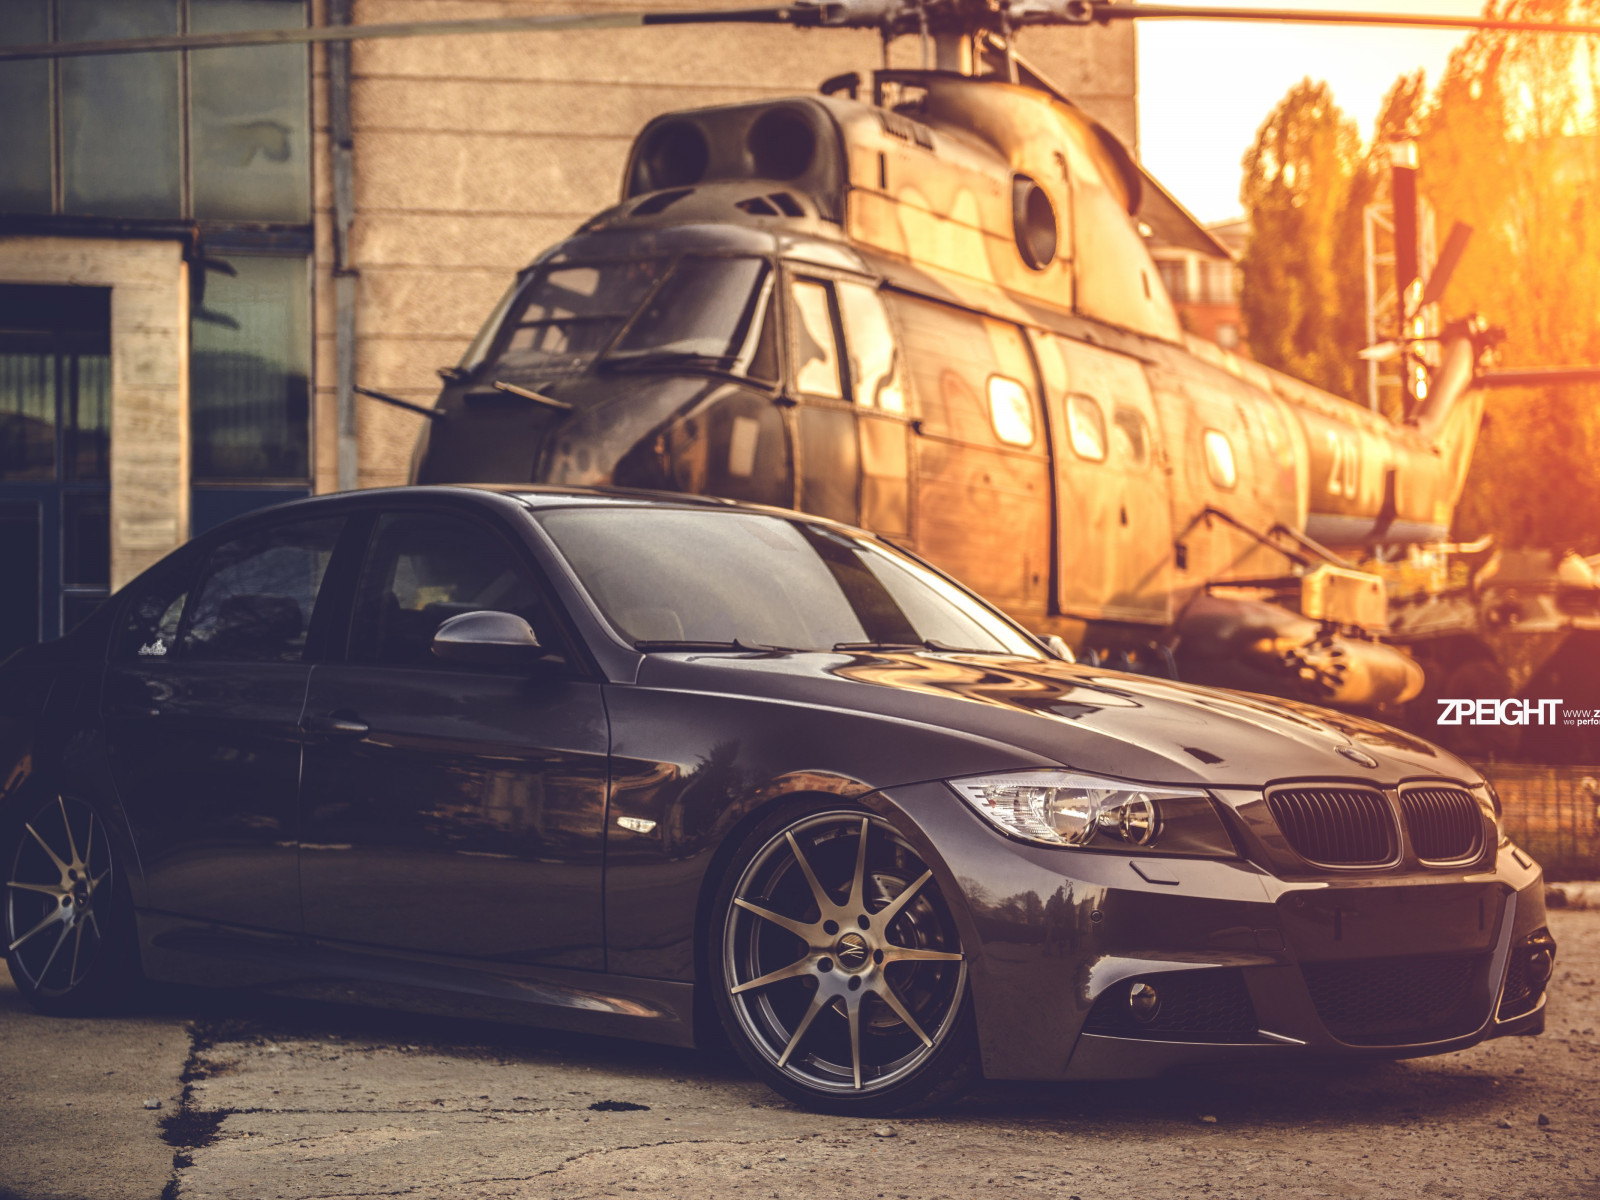 BMW E90 and one helicopter wallpaper 1600x1200